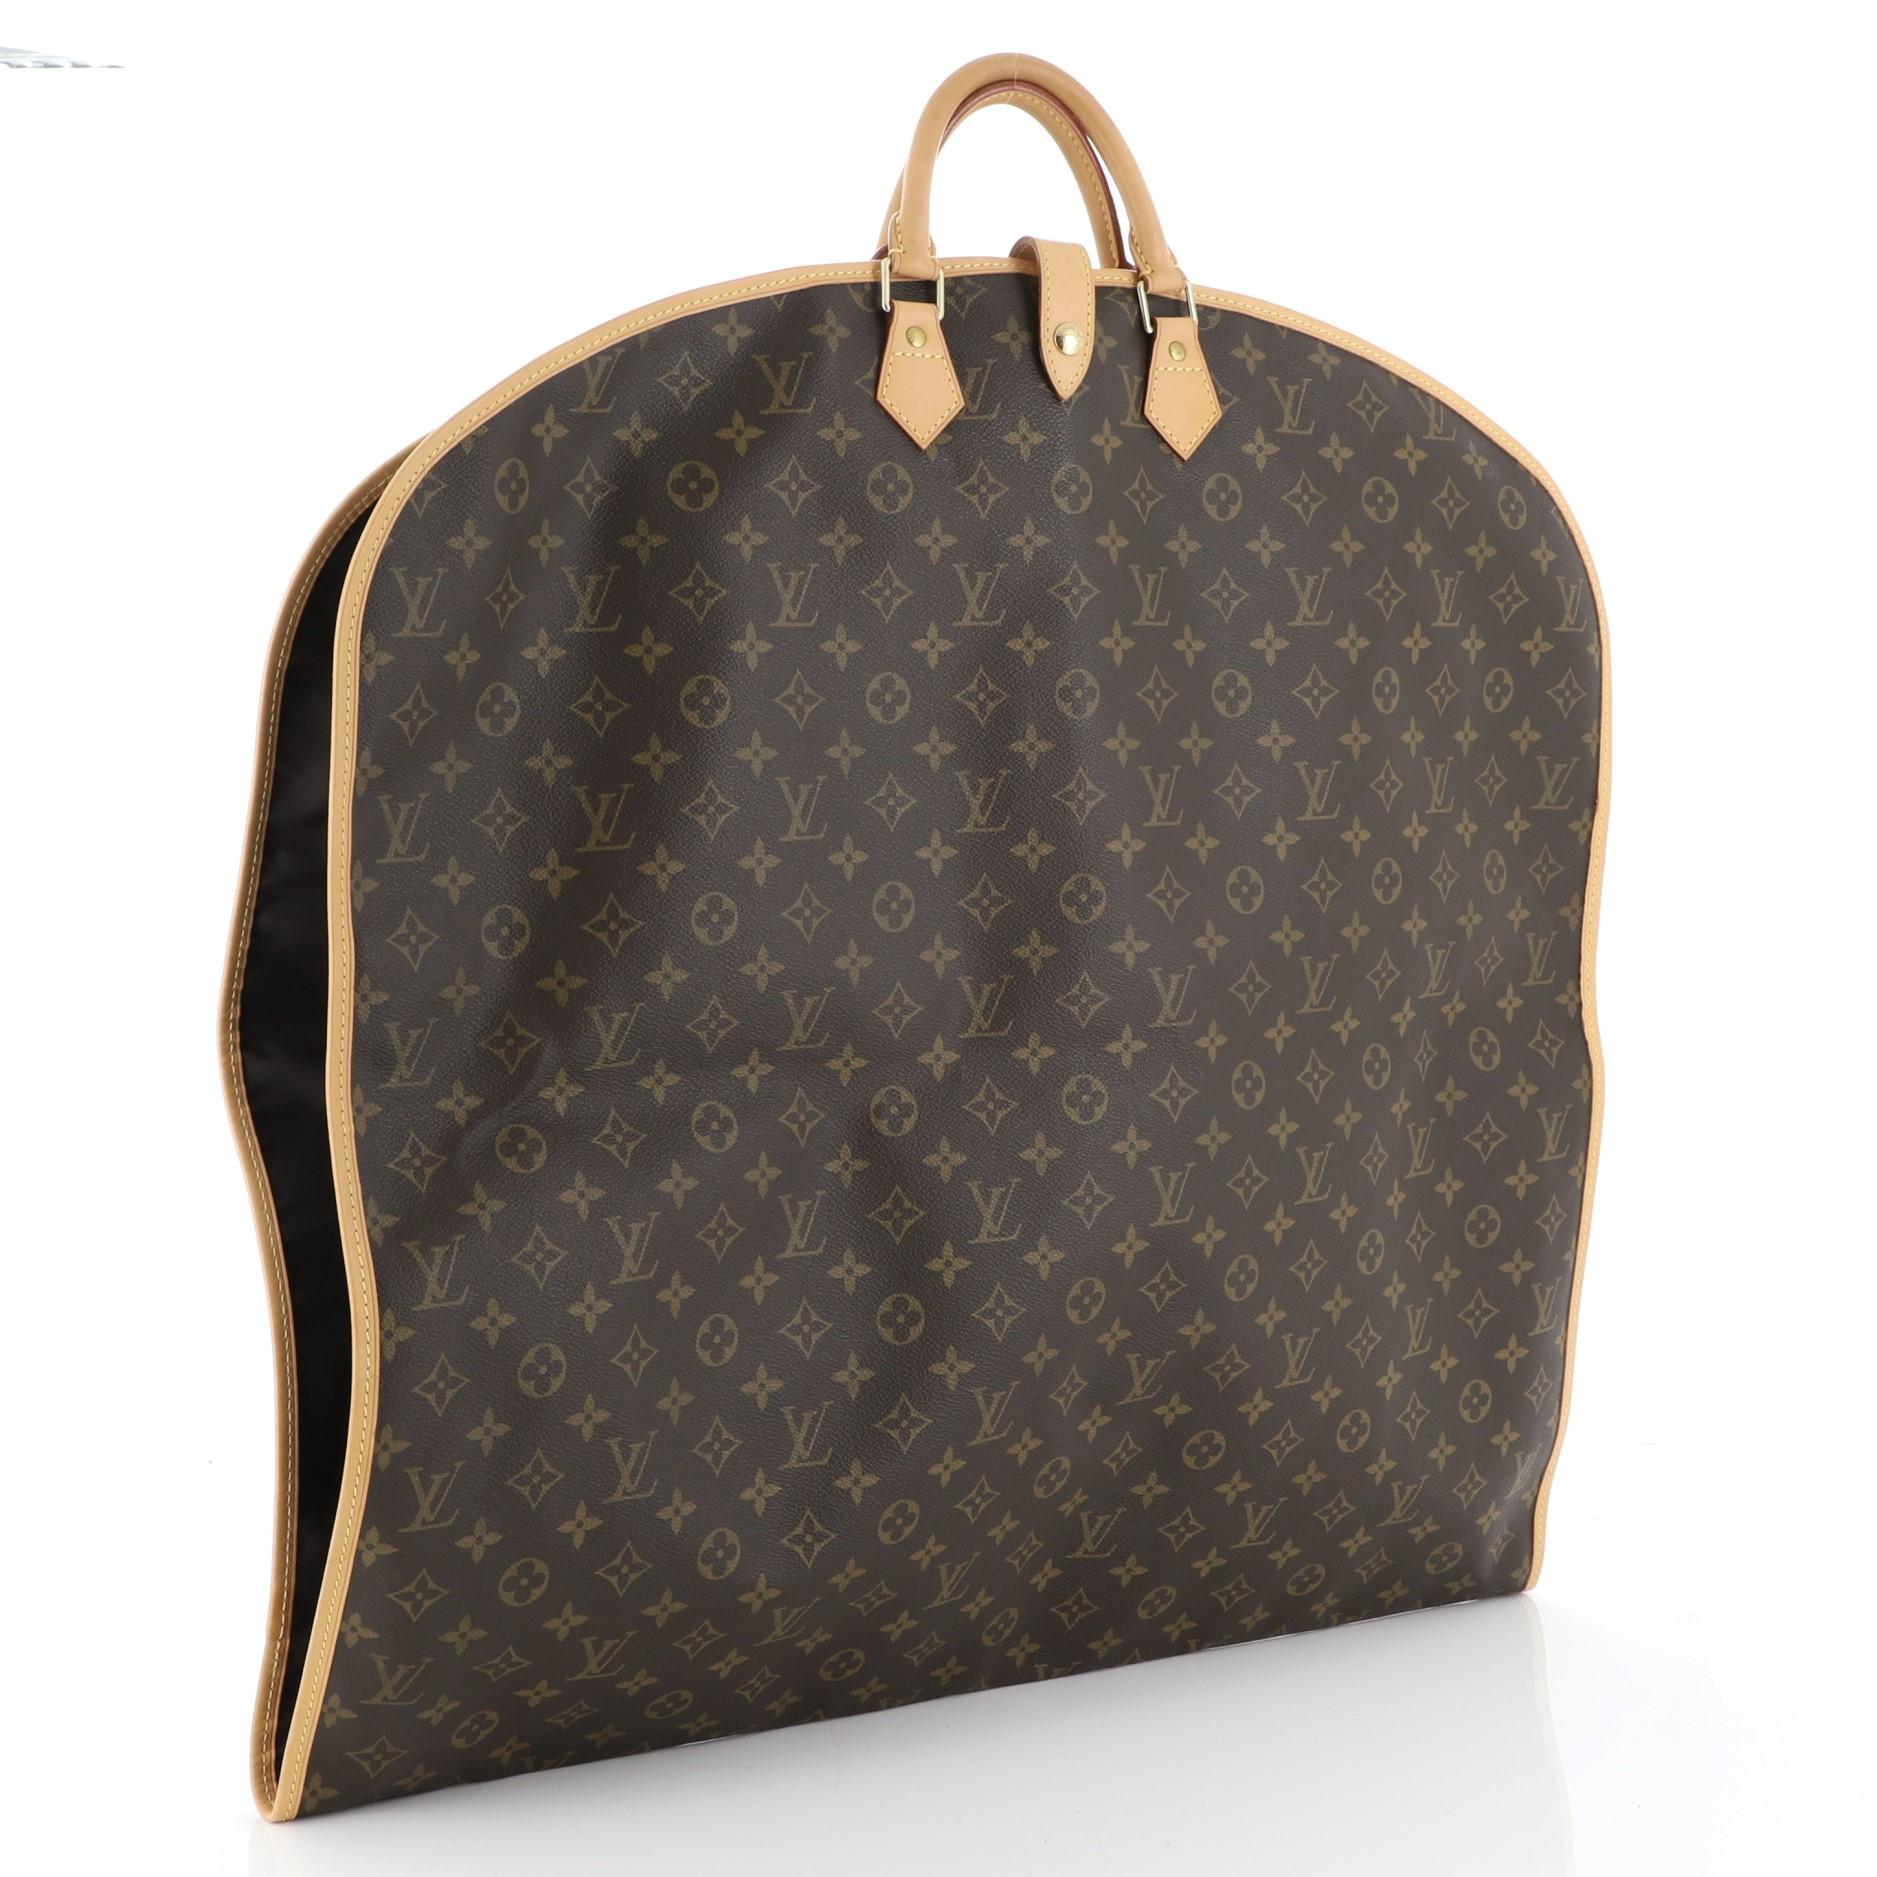 This Louis Vuitton Garment Cover Monogram Canvas, crafted in brown monogram coated canvas, features dual rolled leather handles, vachetta leather, trim, garment cover hook and gold-tone hardware. Its zip closure opens to a brown nylon interior with